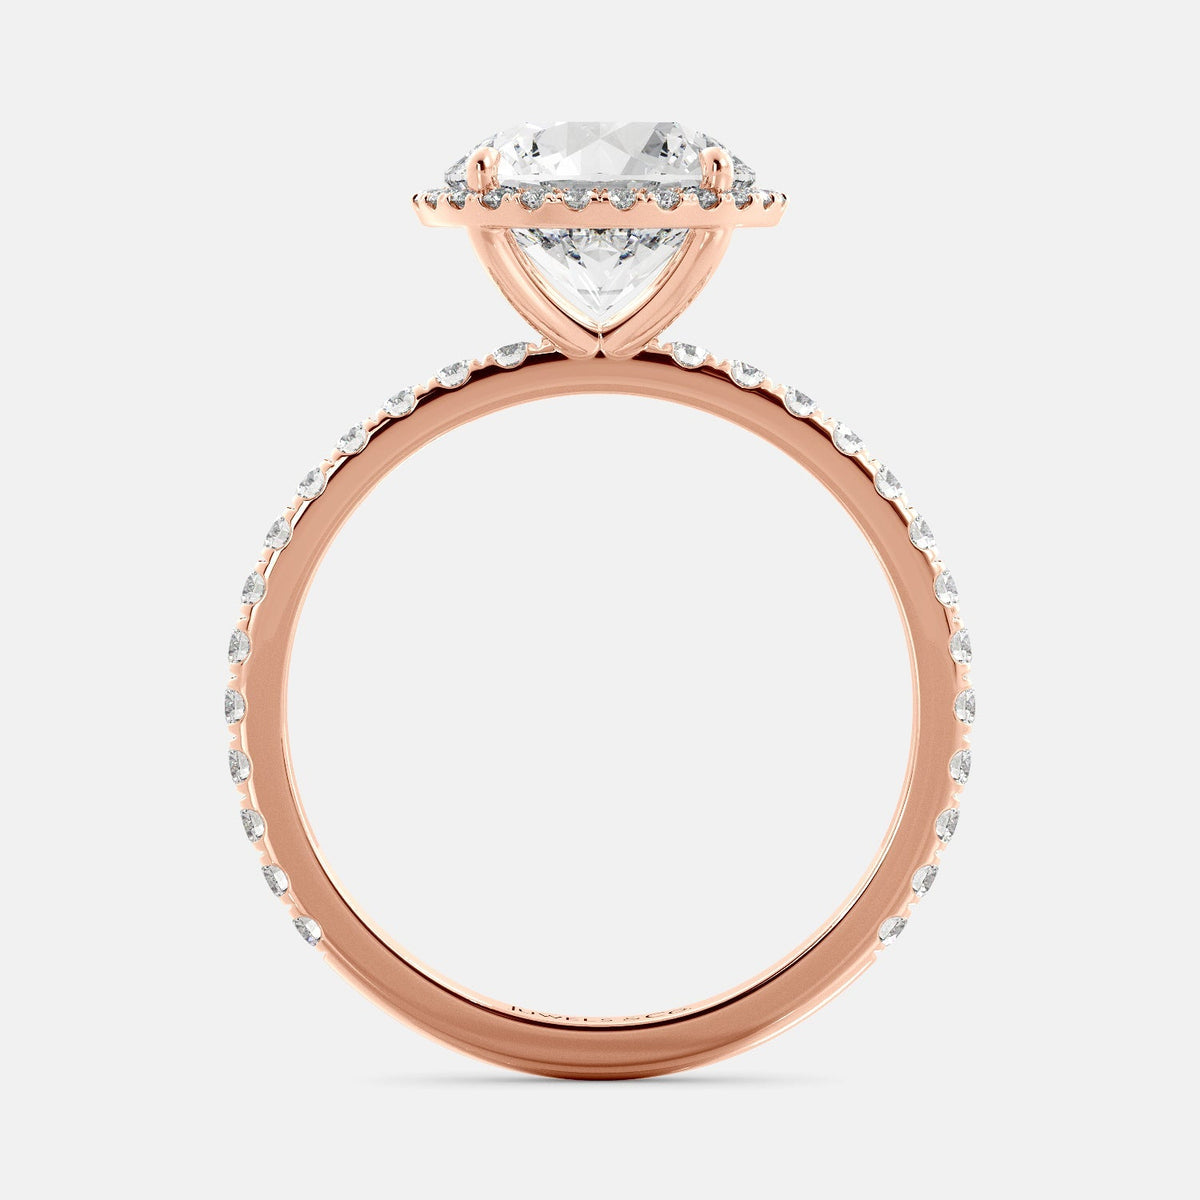 This image shows a beautiful round halo lab-diamond ring with pavé on a rose gold band. The ring features a round brilliant-cut lab-diamond in the center, surrounded by a halo of smaller diamonds. The band is pavé-set with smaller diamonds, creating a sparkling and elegant look. The ring is made of 14k rose gold and is available in a variety of sizes.